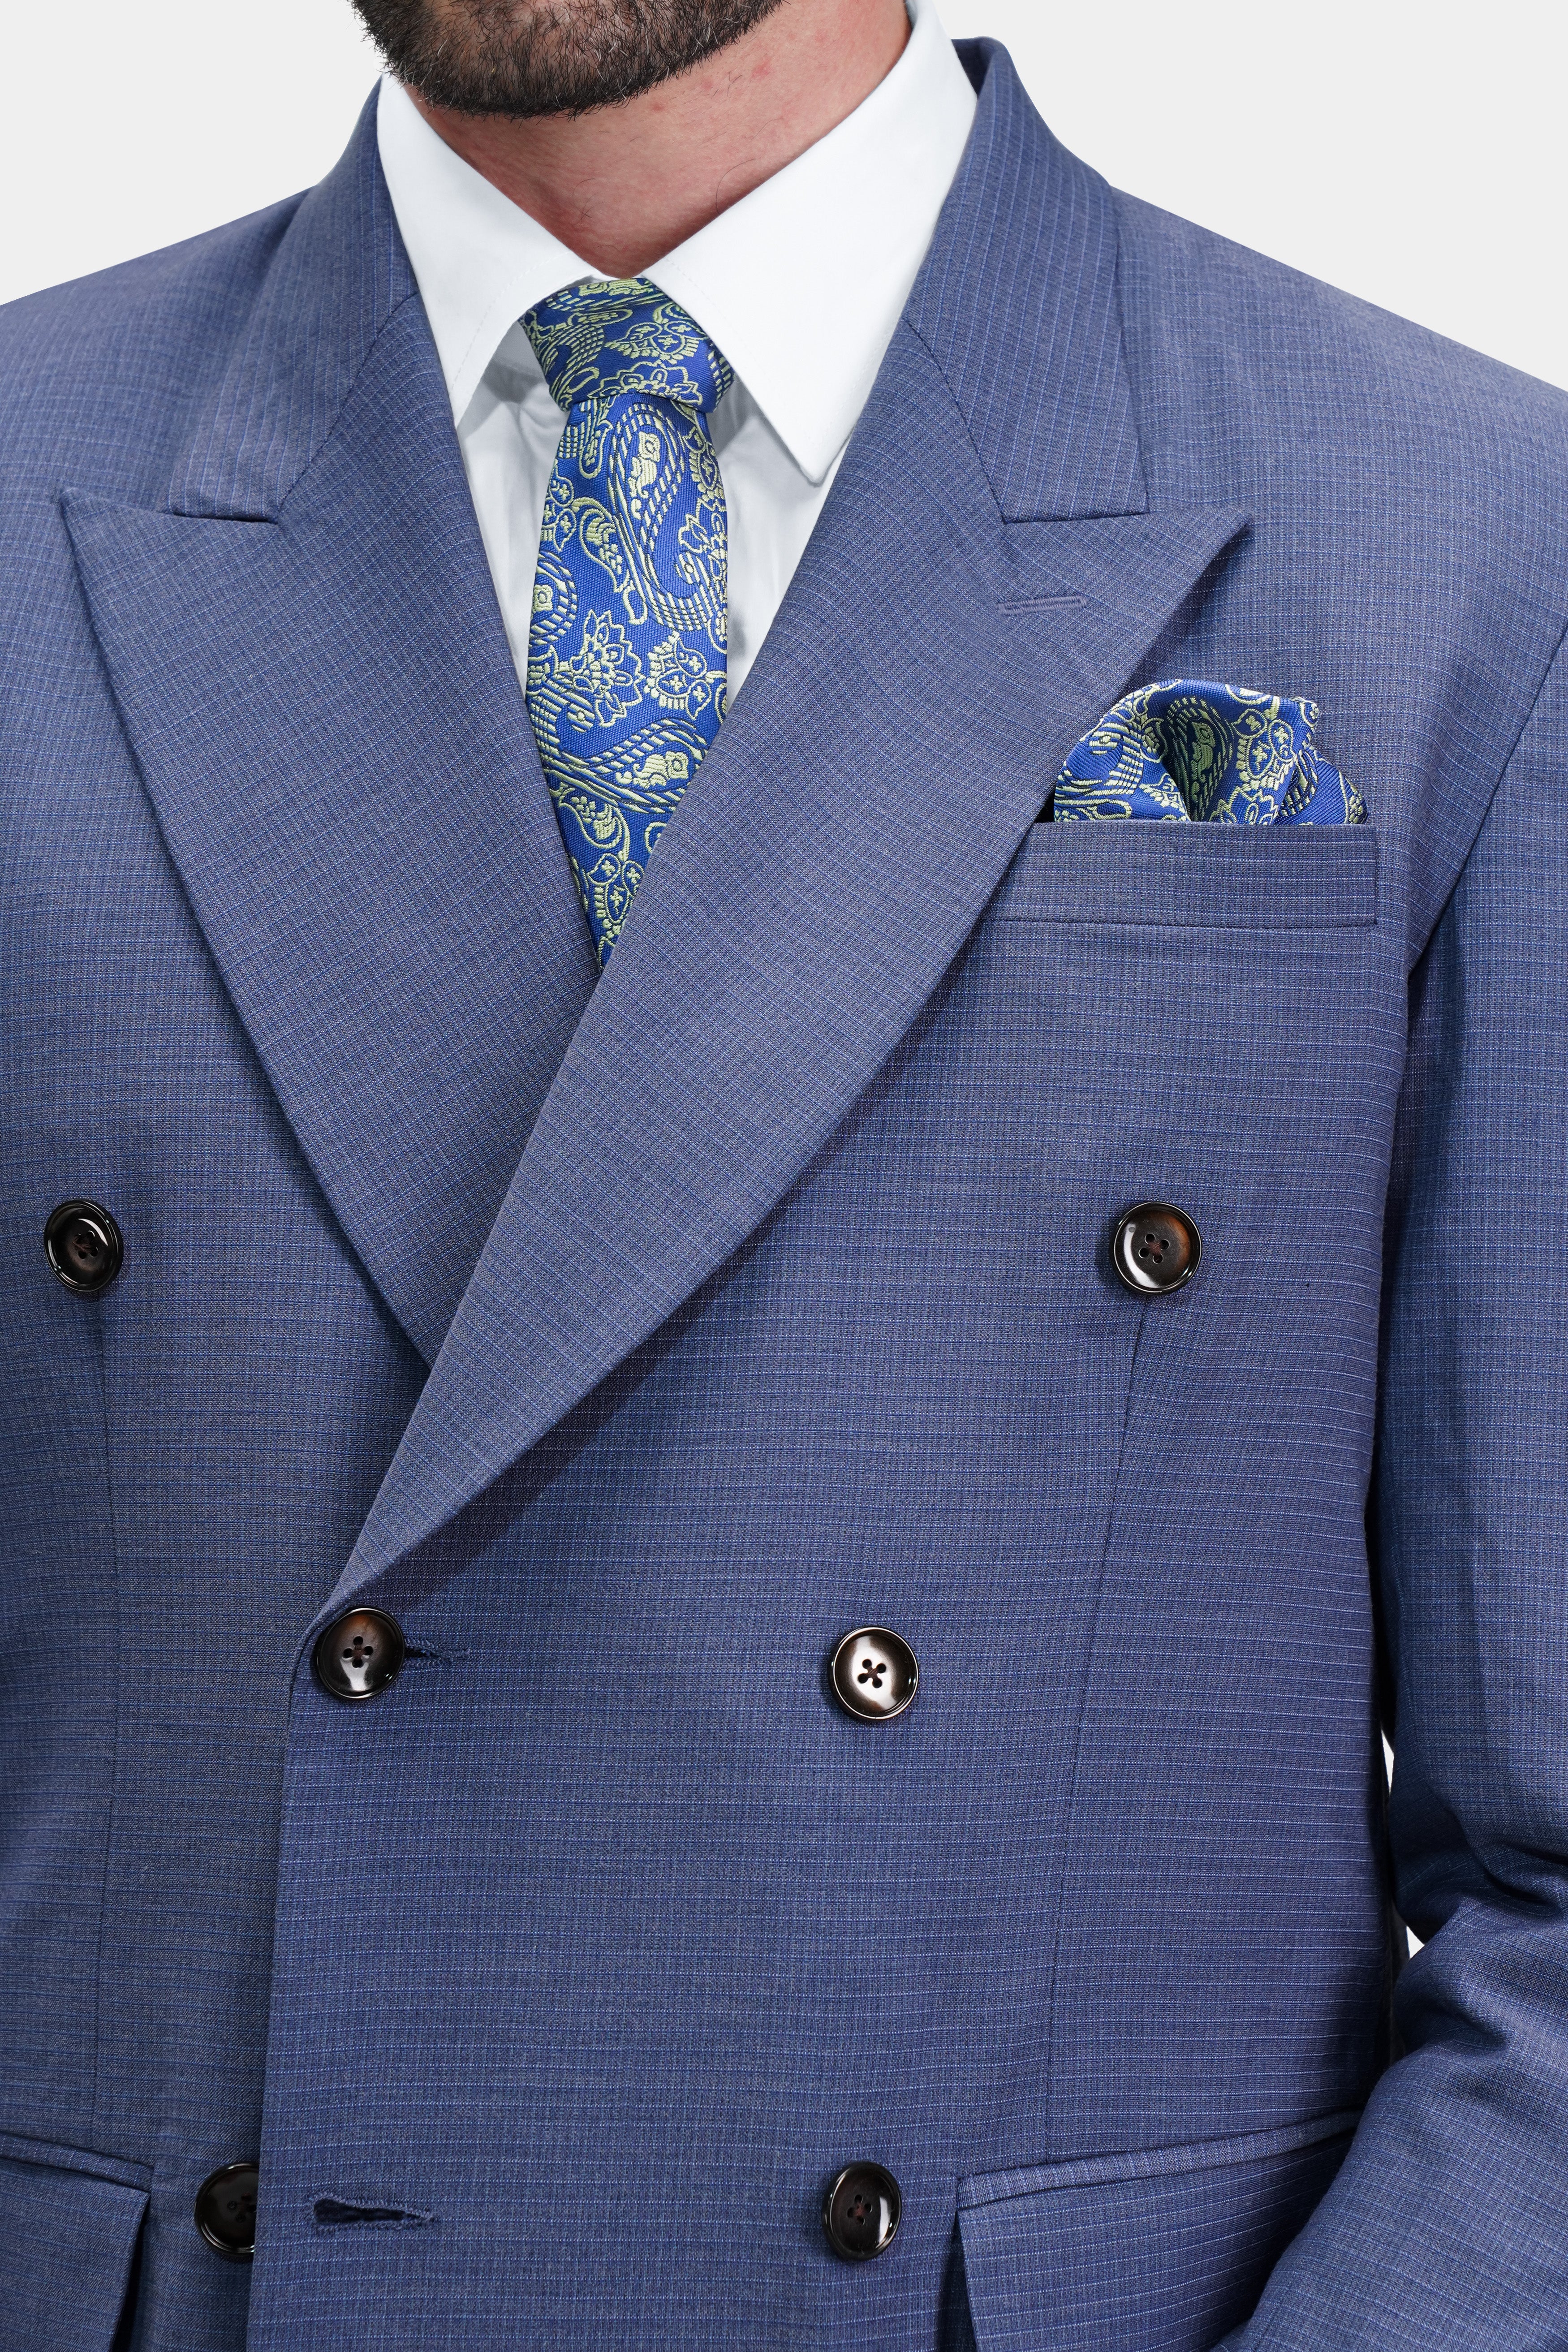 Twilight Blue Checkered Double Breasted Wool Rich Suit ST2768-DB-36, ST2768-DB-38, ST2768-DB-40, ST2768-DB-42, ST2768-DB-44, ST2768-DB-46, ST2768-DB-48, ST2768-DB-50, ST2768-DB-52, ST2768-DB-54, ST2768-DB-56, ST2768-DB-58, ST2768-DB-60